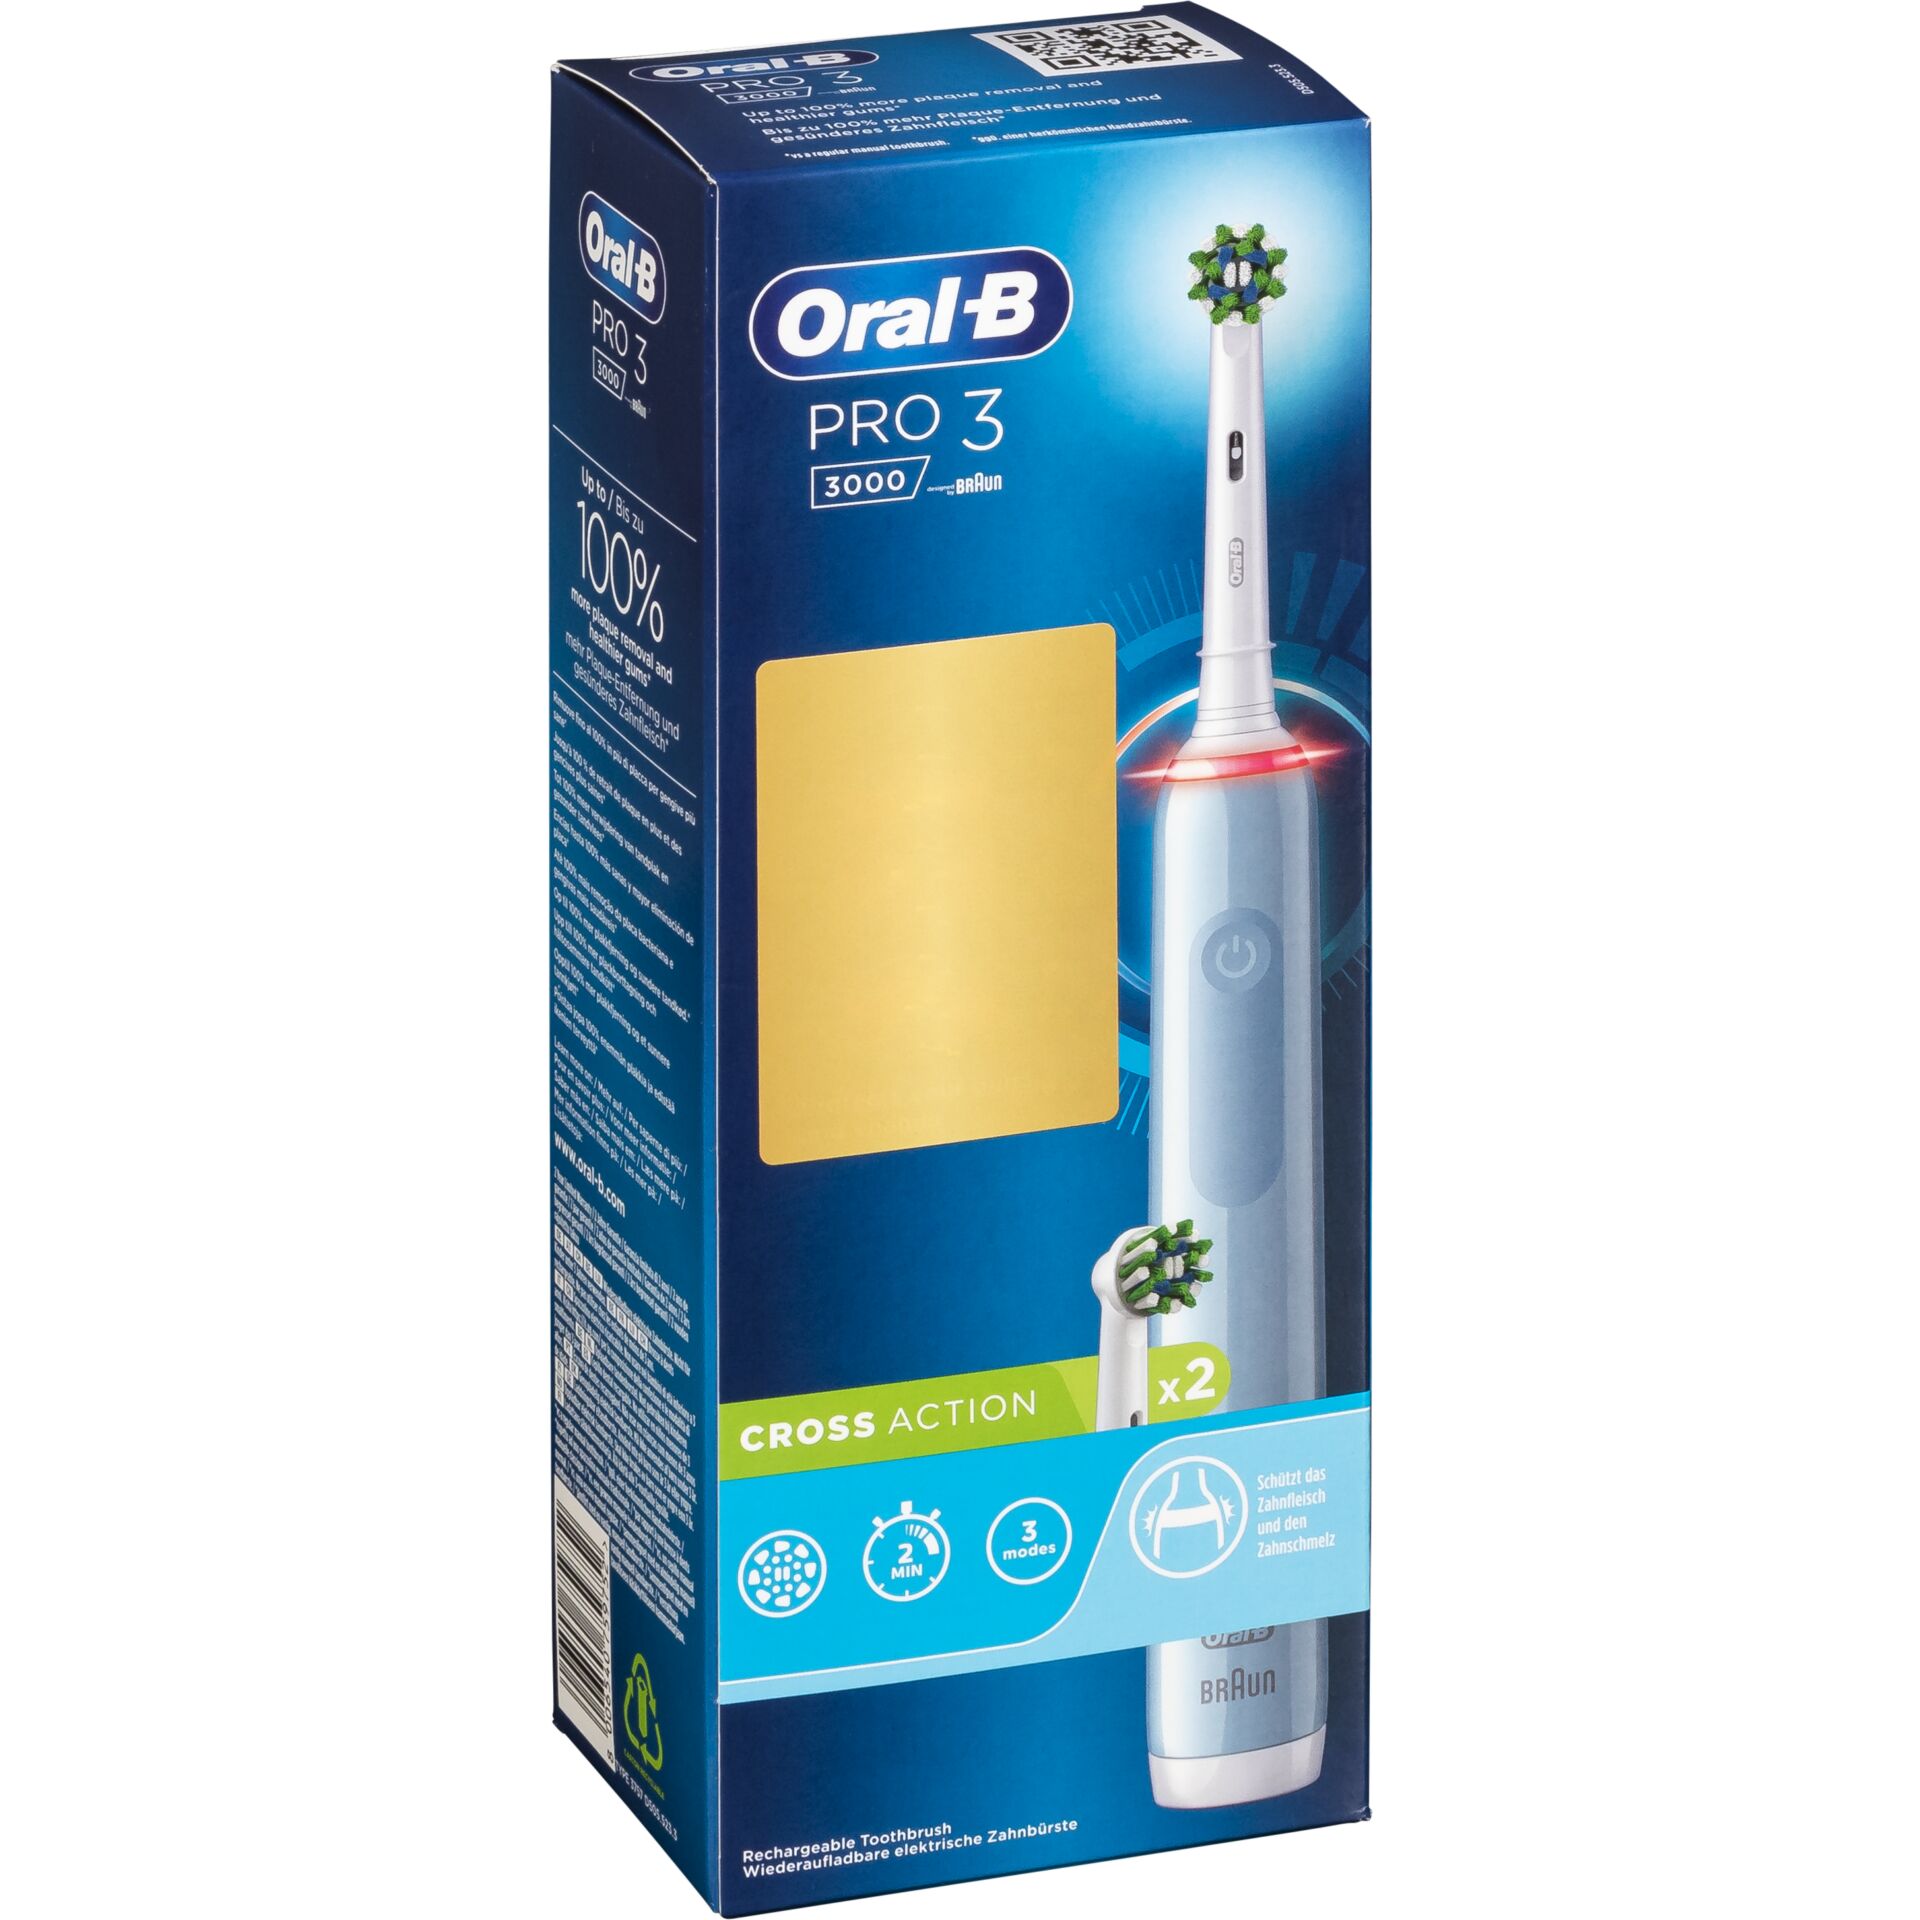 Oral-B PRO 3 3000 Cross Action Blue Edition JAS 22